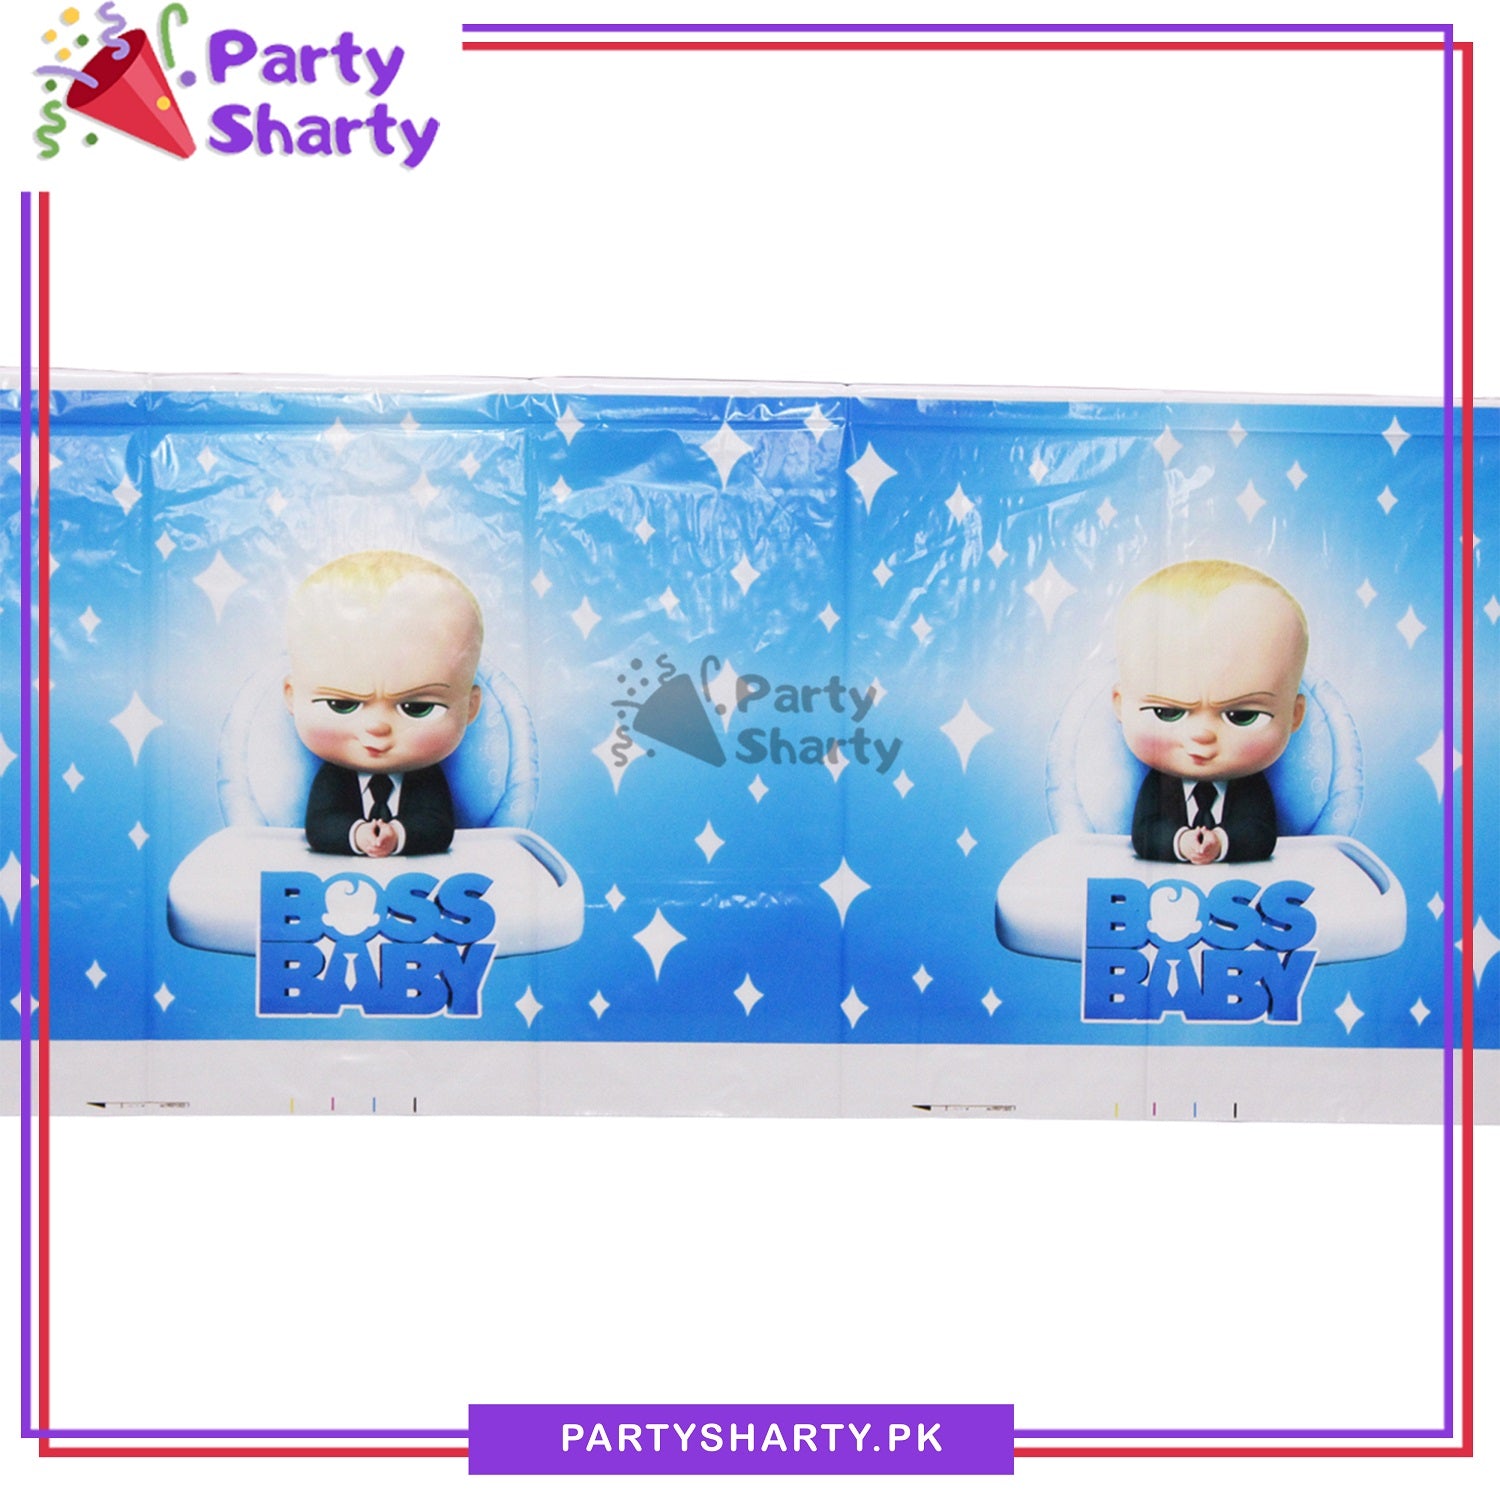 Boss Baby Theme Table Cover for Birthday Party and Decoration